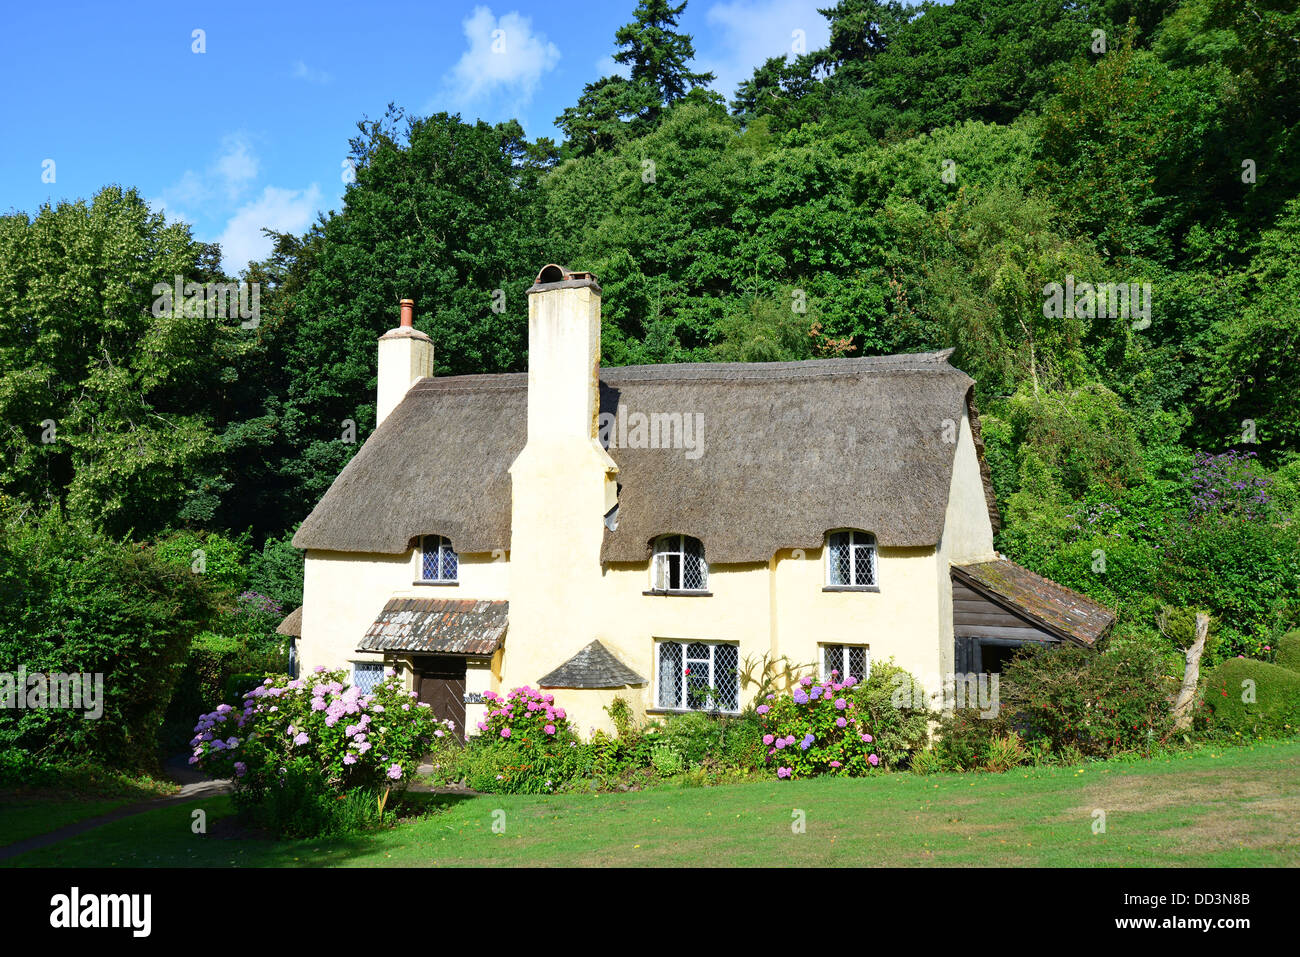 Cottage, Bow Selworthy, Somerset, England, United Kingdom Banque D'Images